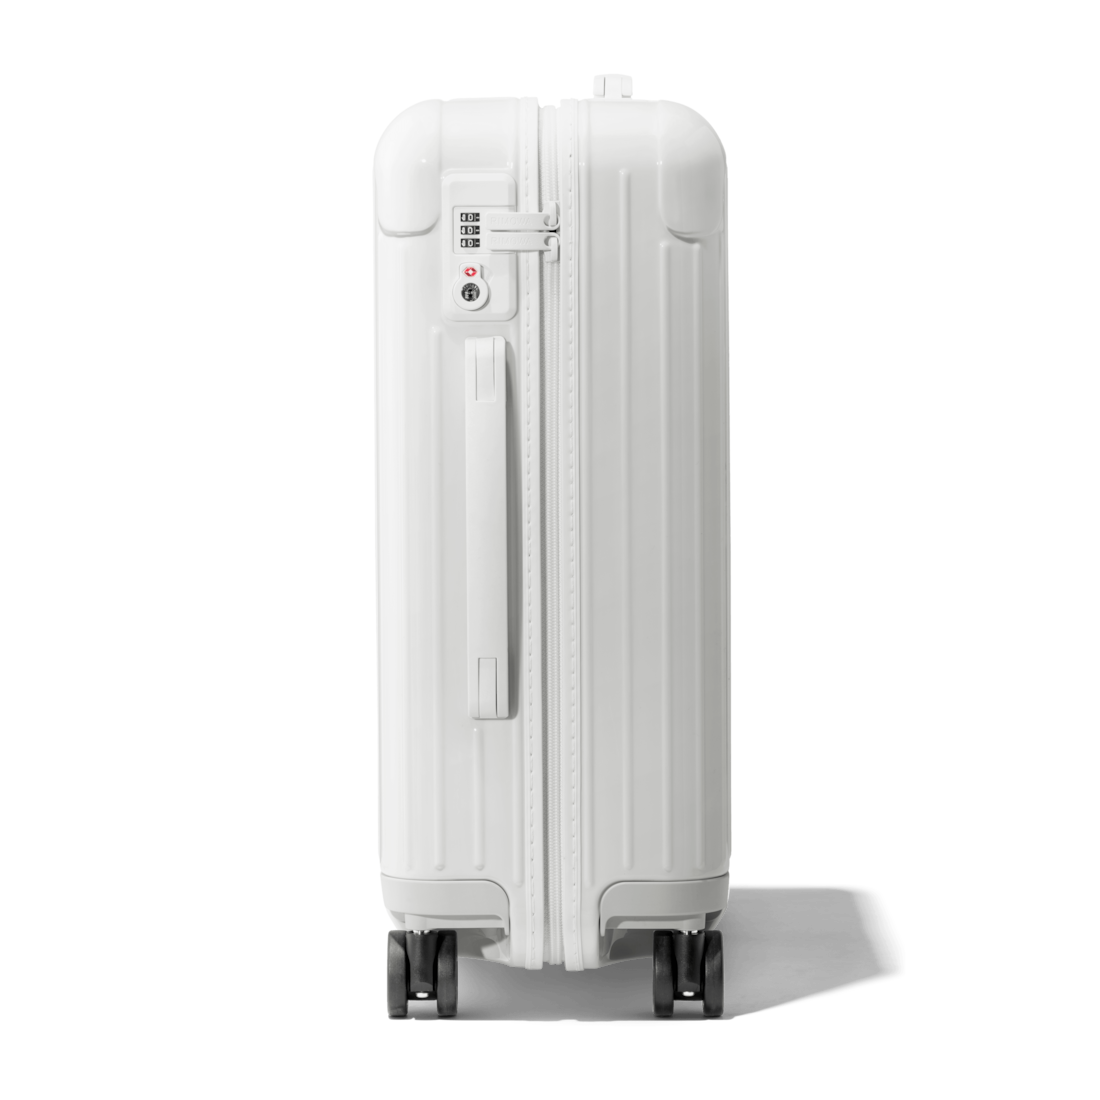 Essential Cabin S Lightweight Carry-On Suitcase | White Gloss | RIMOWA